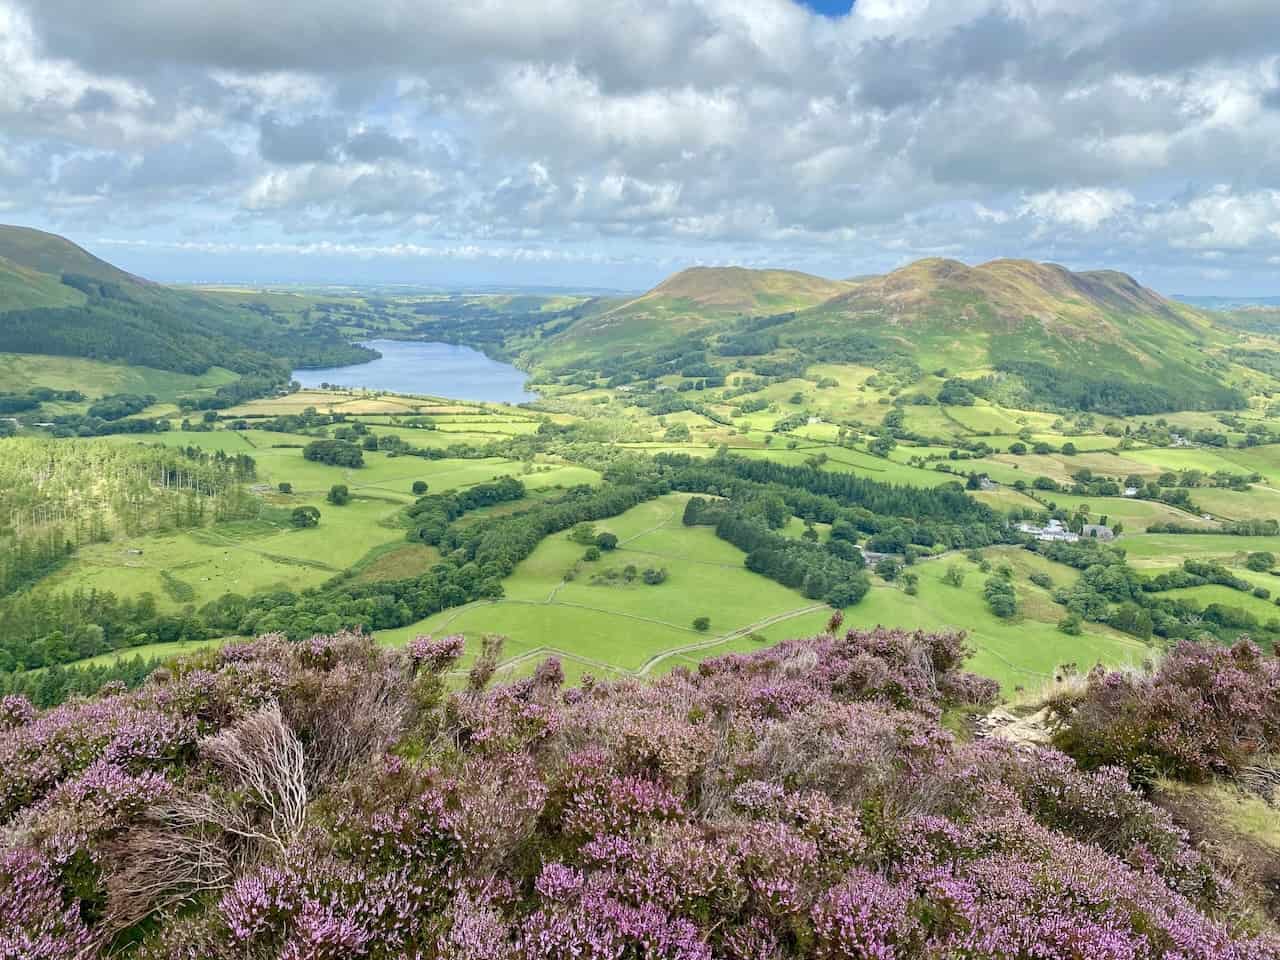 The ascent is difficult but the views during our Mellbreak walk are breathtaking. Looking north-west, Loweswater is surrounded by Low Fell, Darling Fell, Carling Knott and Burnbank, with the Solway Firth in the far distance.